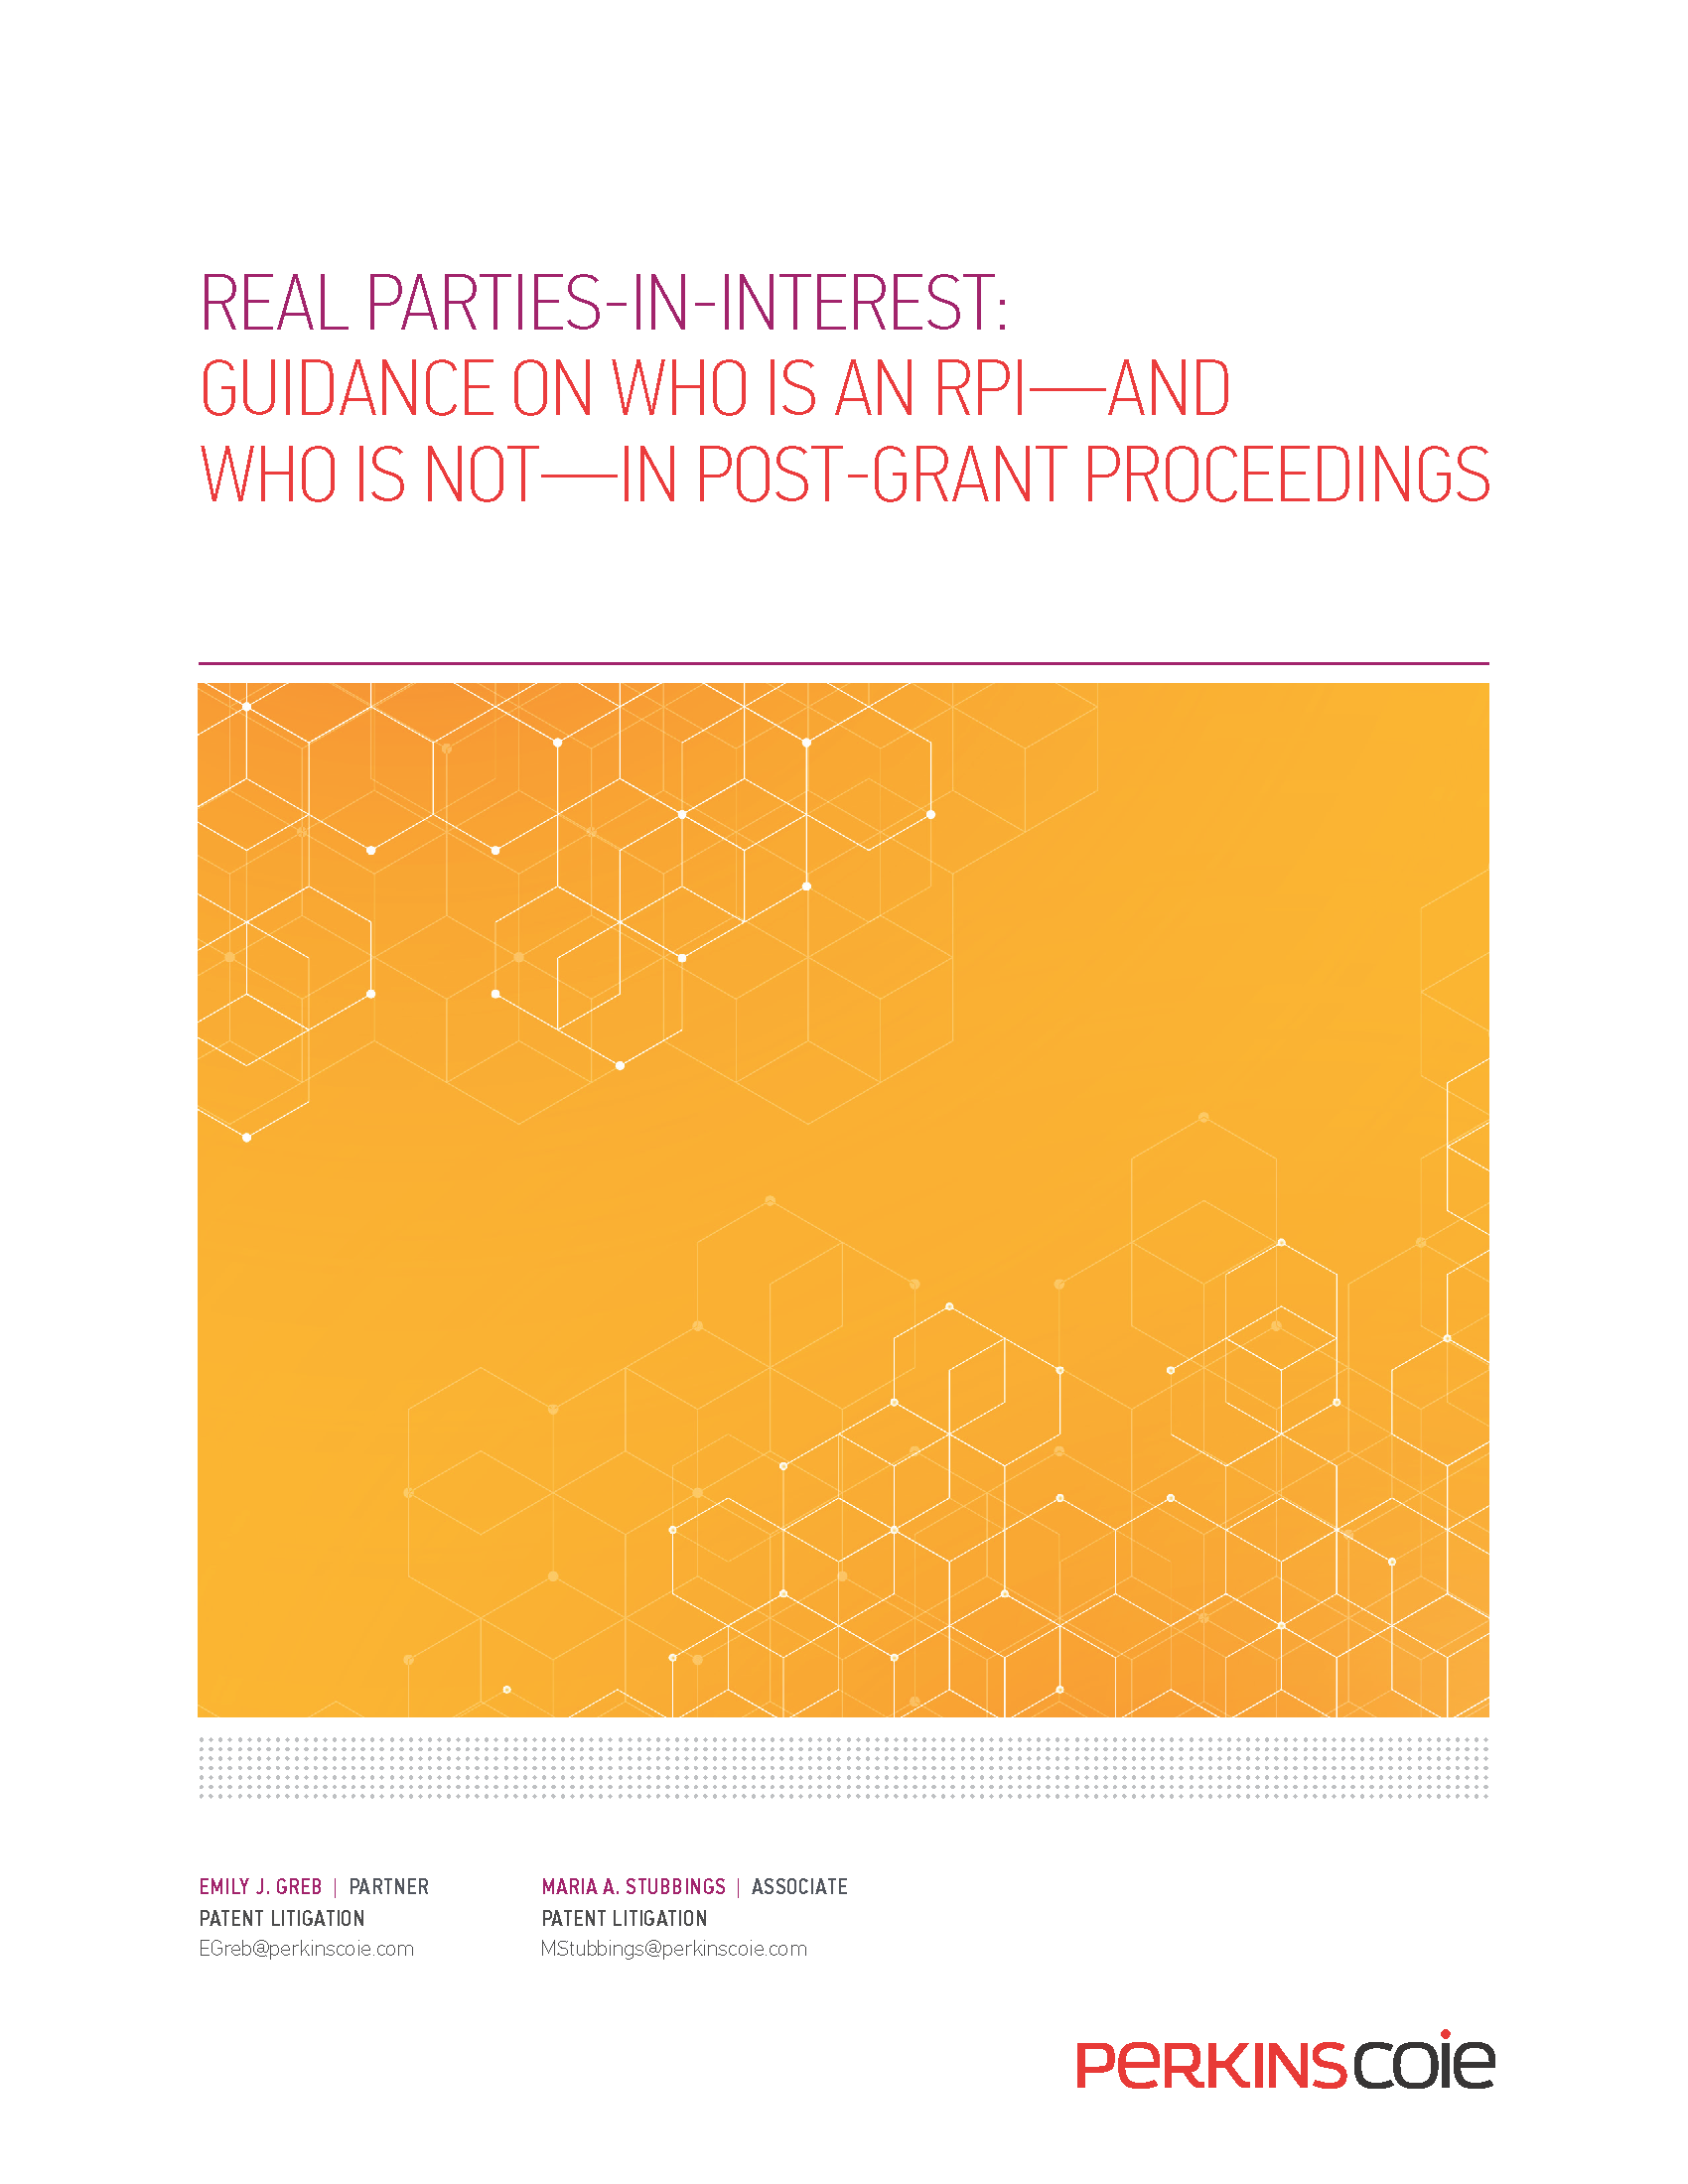 Real Parties-In-Interest Guidance On Who Is An RPI—And Who Is 